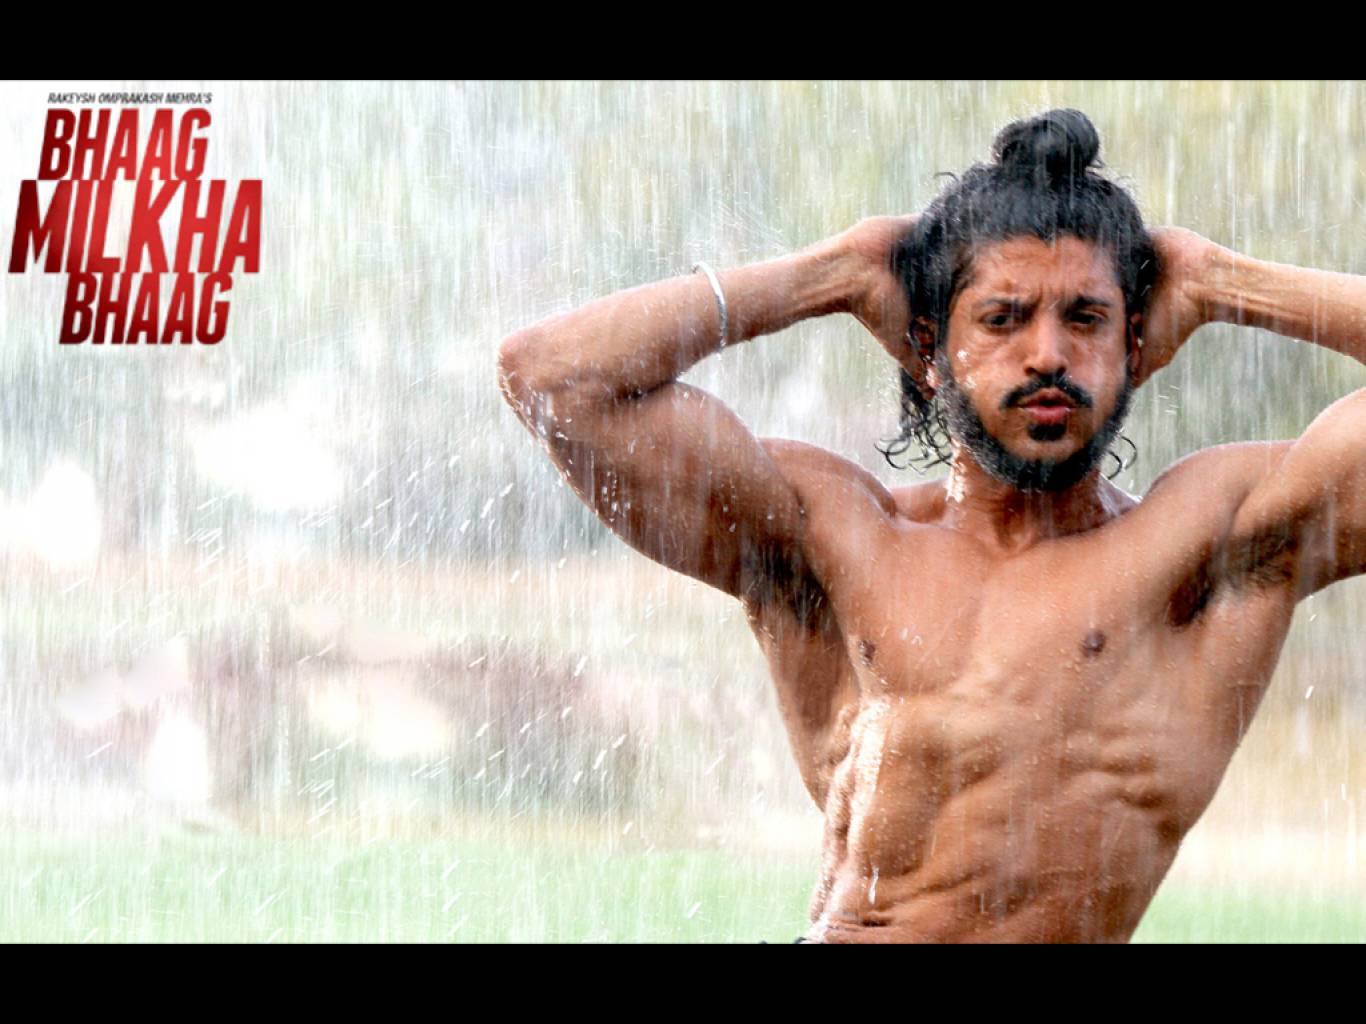 bhaag milkha bhaag movie song download